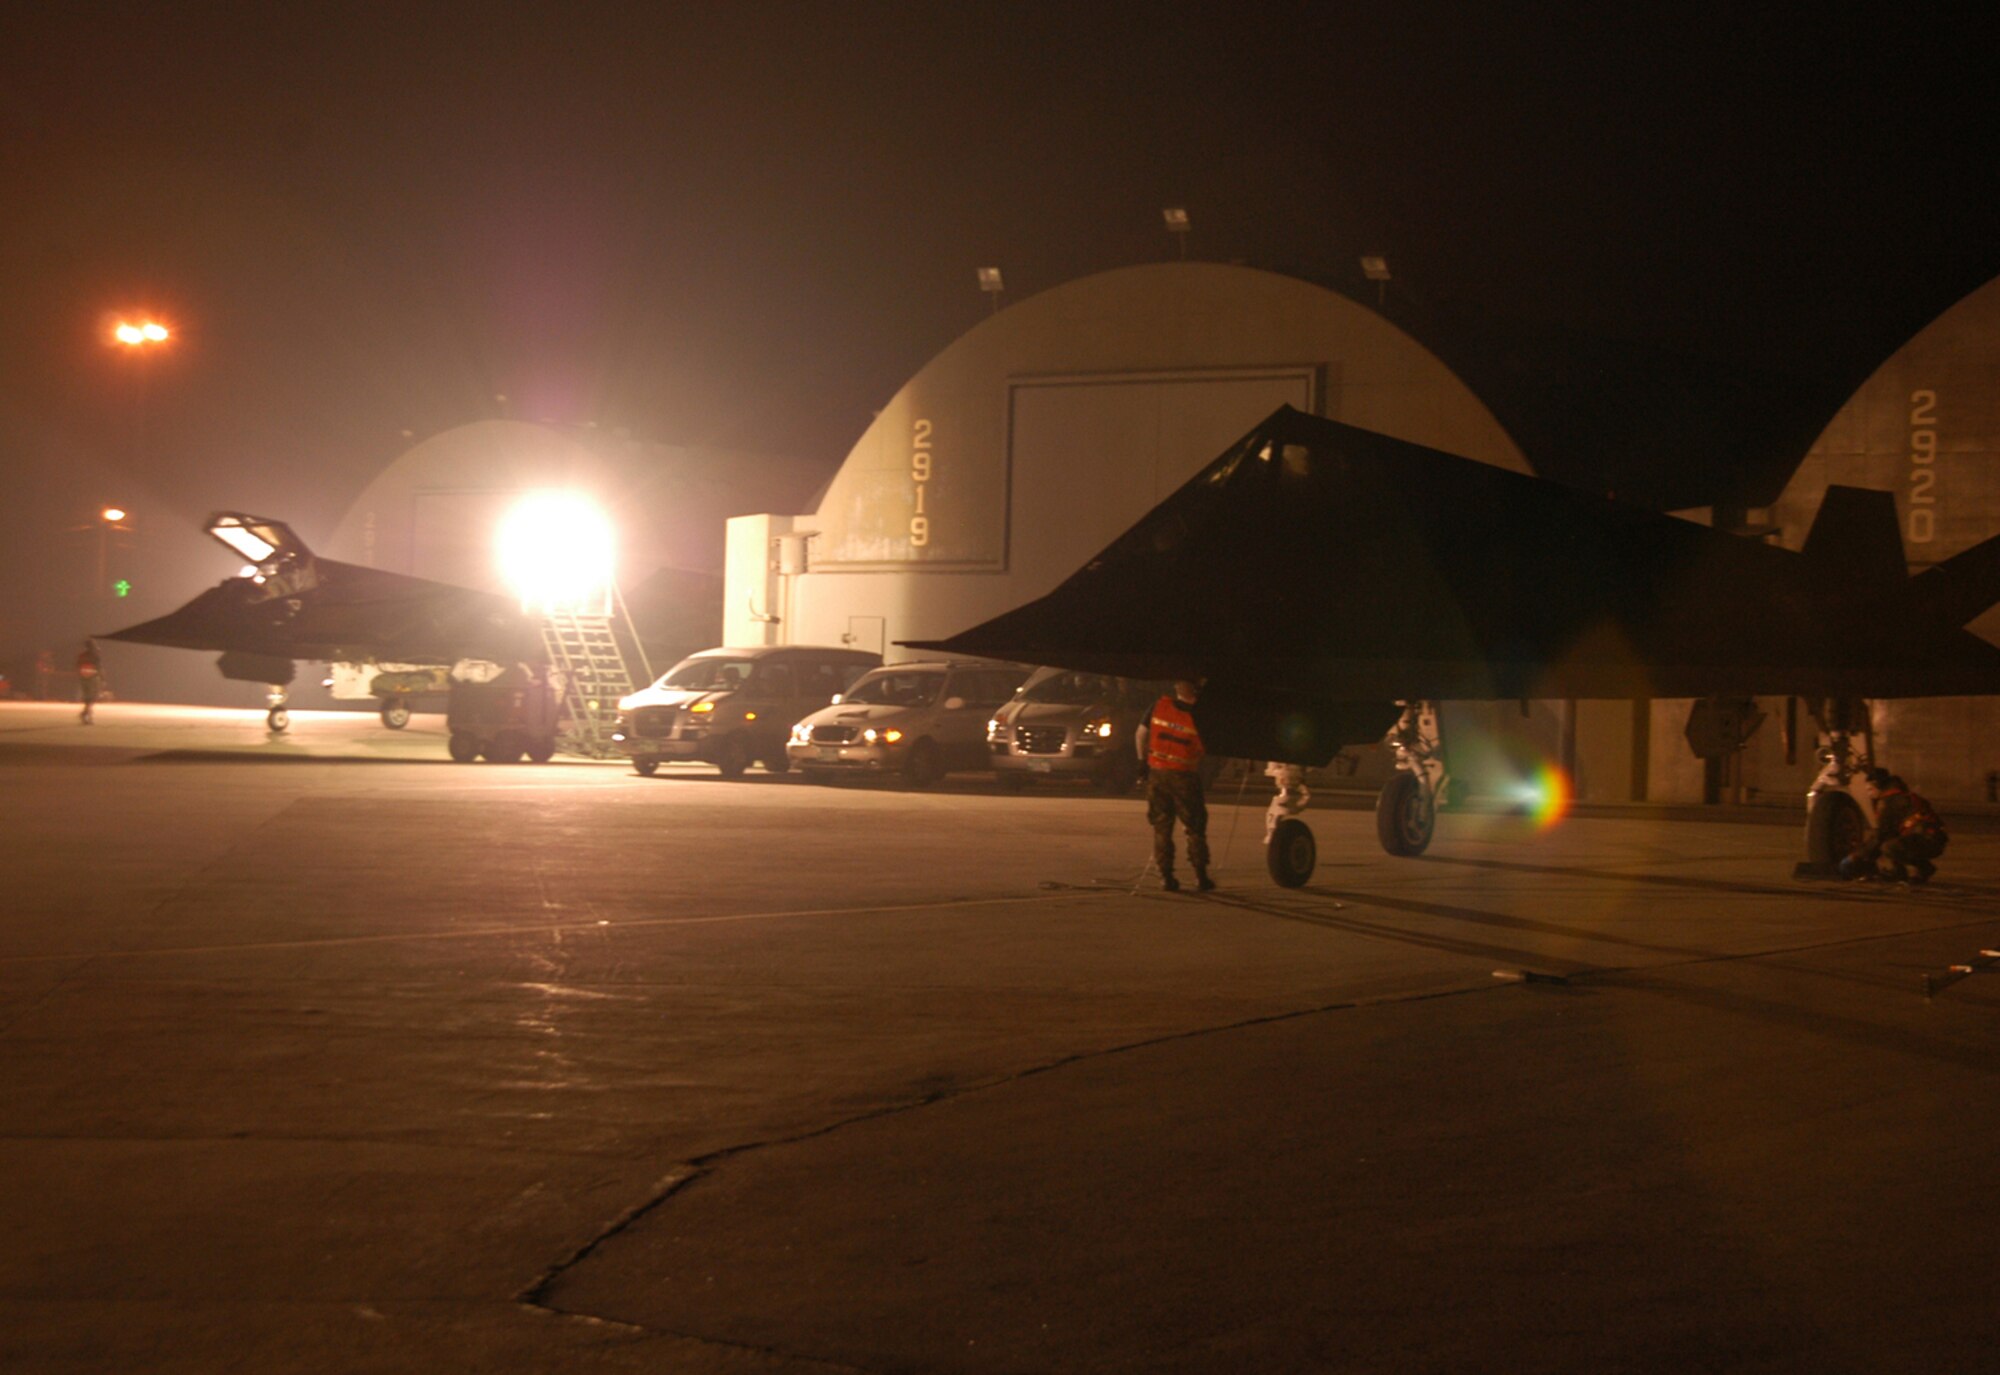 KUNSAN AIR BASE, Republic of Korea  April 9, 2007 -- Two F-117 Nighthawk stealth fighters are prepped for flight by their crew chiefs April 9 here. The fighters, which began redeploying last week, are the last of the F-117s leaving for Holloman Air Force Base, N.M. The low-observable aircraft, assigned to the 9th Expeditionary Fighter Squadron, have been deployed to Kunsan since early January. Maintainers and support personnel are expected to redeploy in the coming week. (U.S. Air Force photo/Senior Airman Stephen Collier)